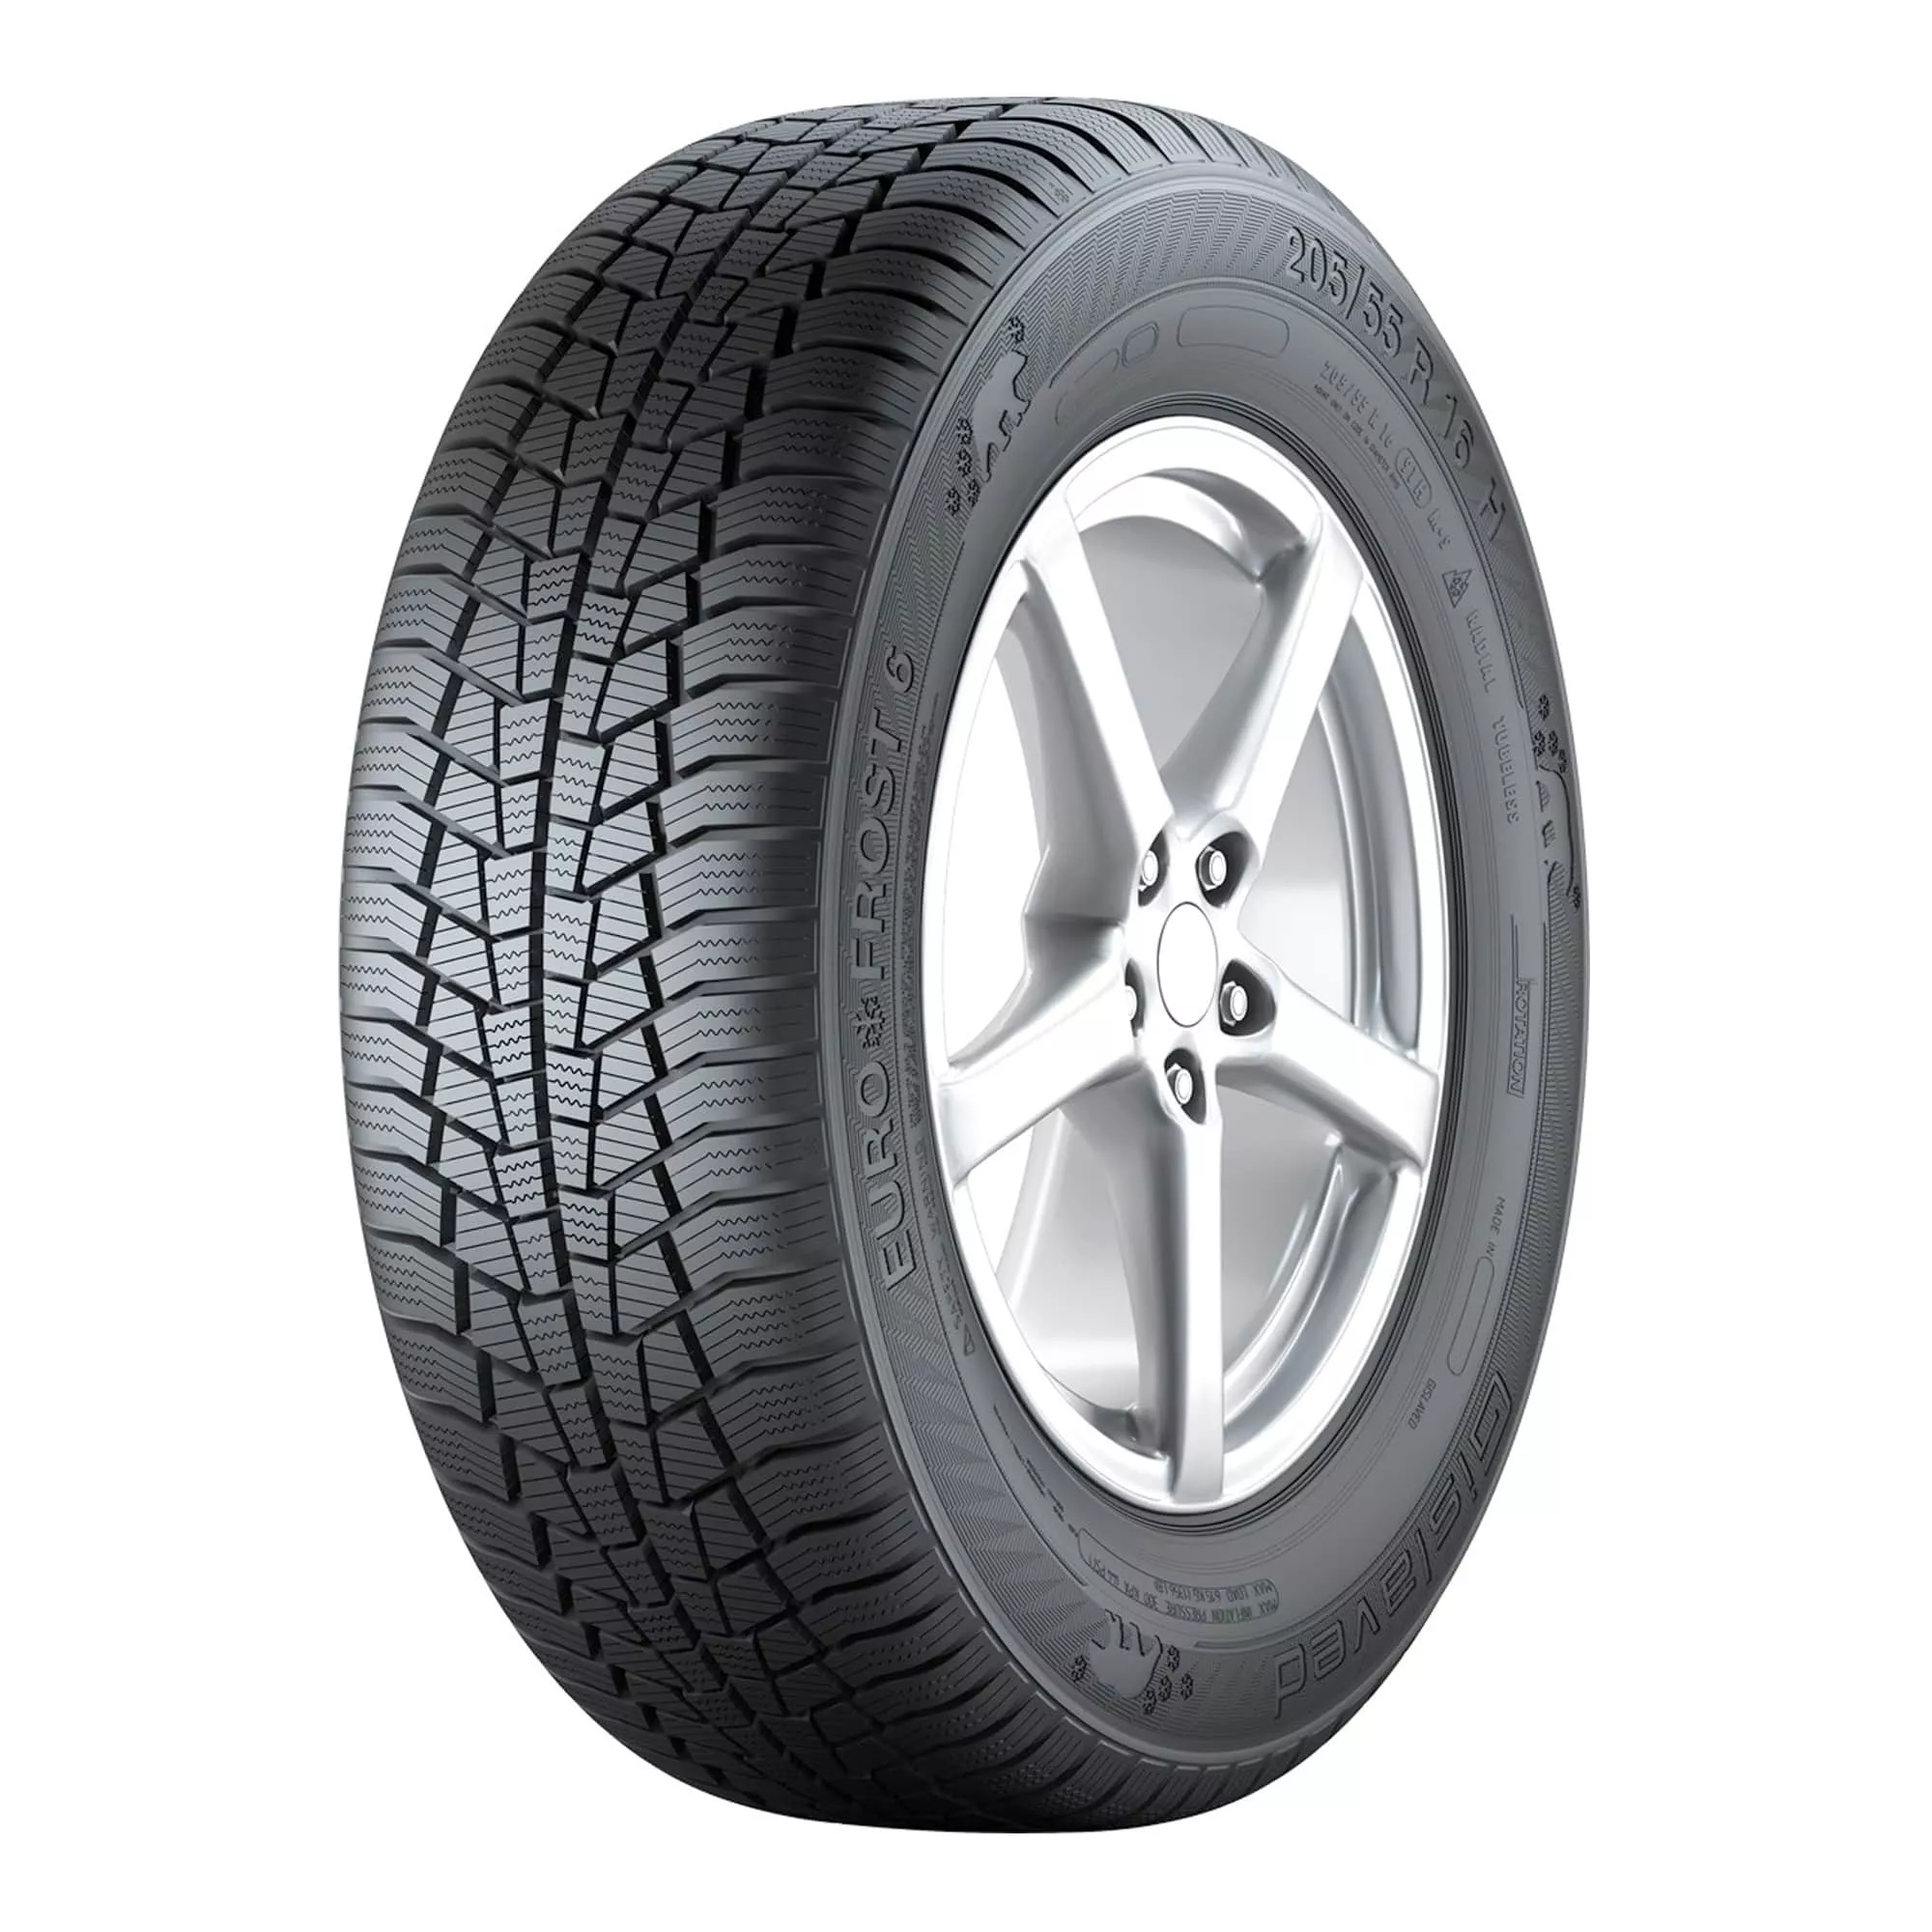 Шина 185/60R14 82T Euro*Frost 6